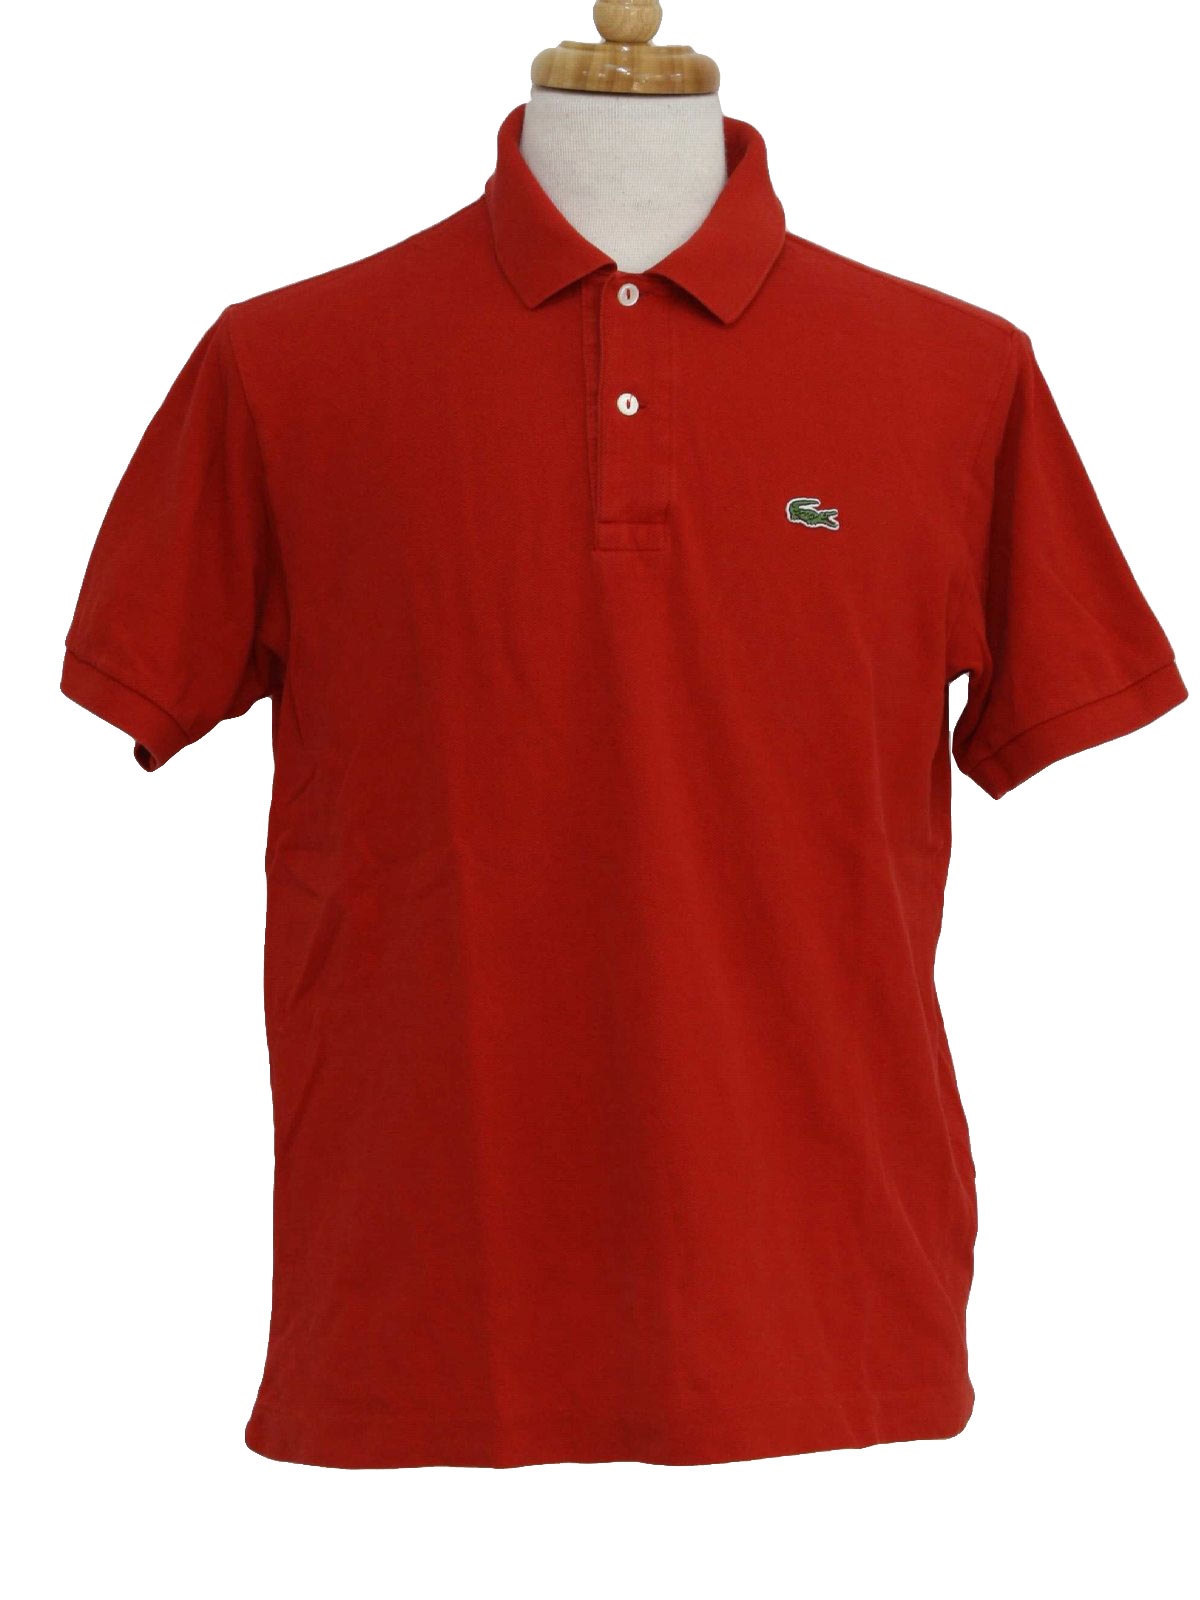 80's Vintage Shirt: 80s -Lacoste- Mens red woven cotton short sleeve ...